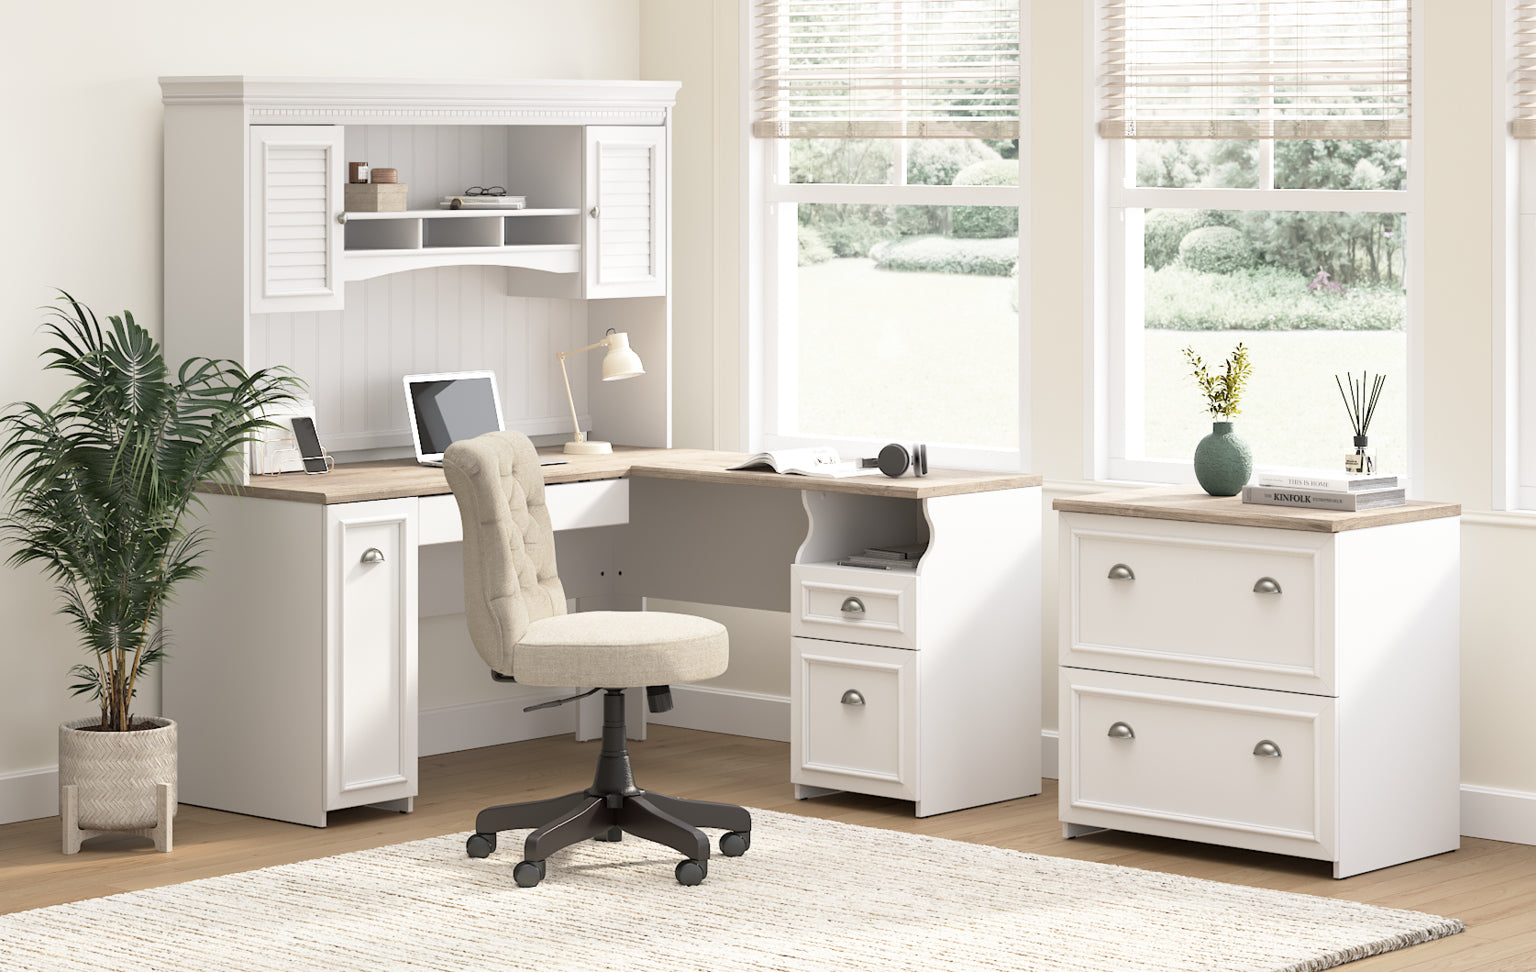 The Best L-Shaped Desks for Your Home Office